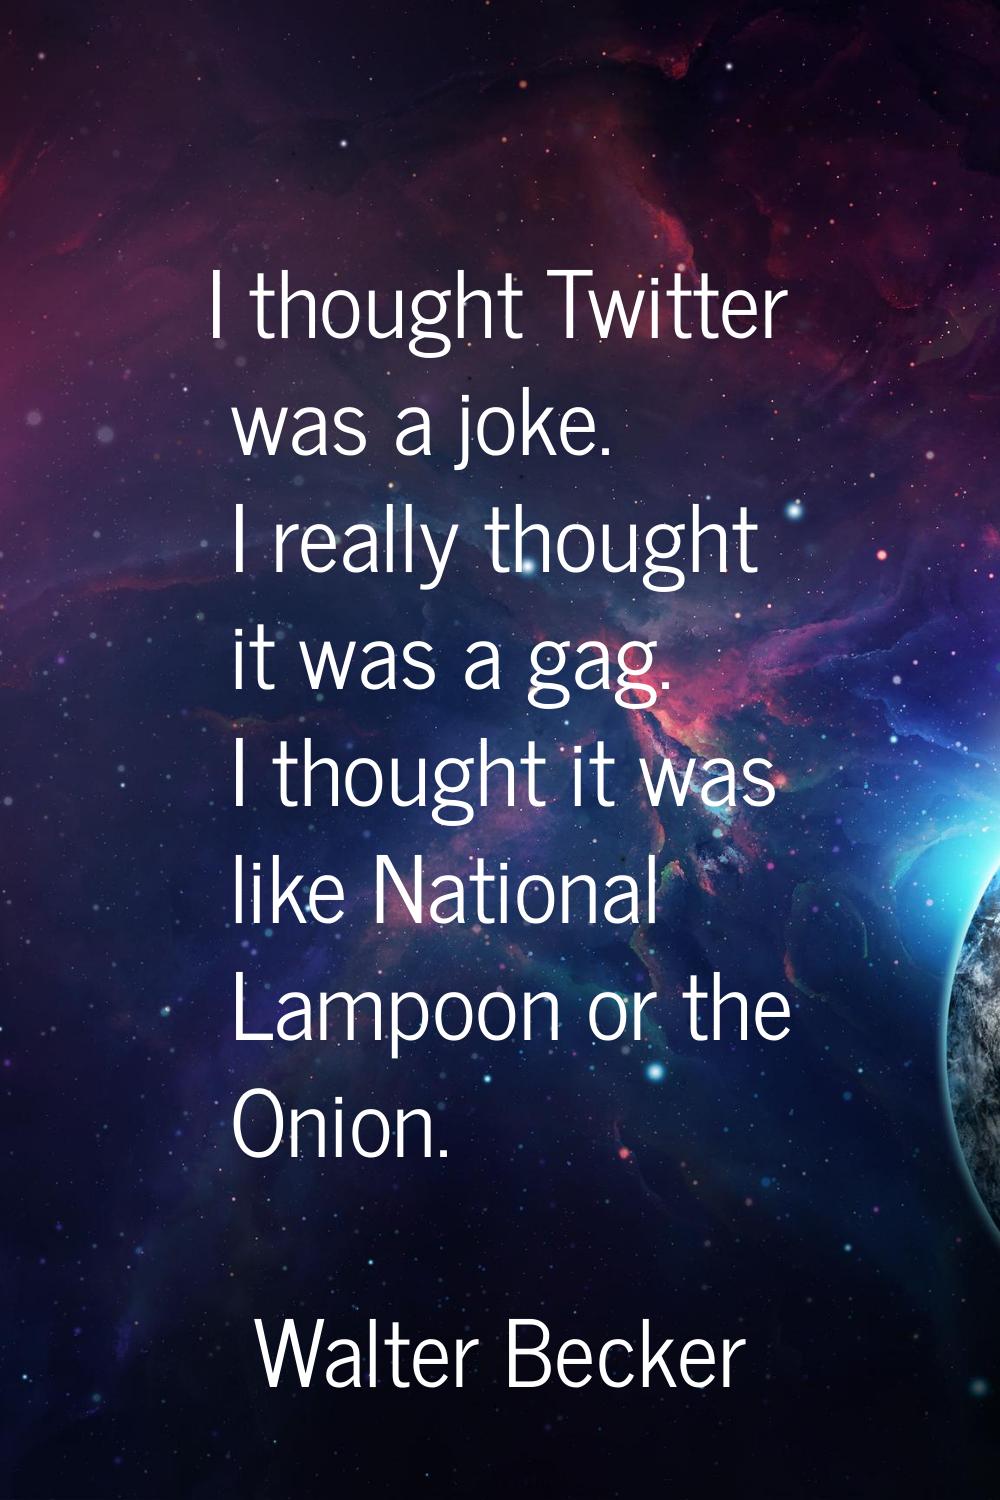 I thought Twitter was a joke. I really thought it was a gag. I thought it was like National Lampoon